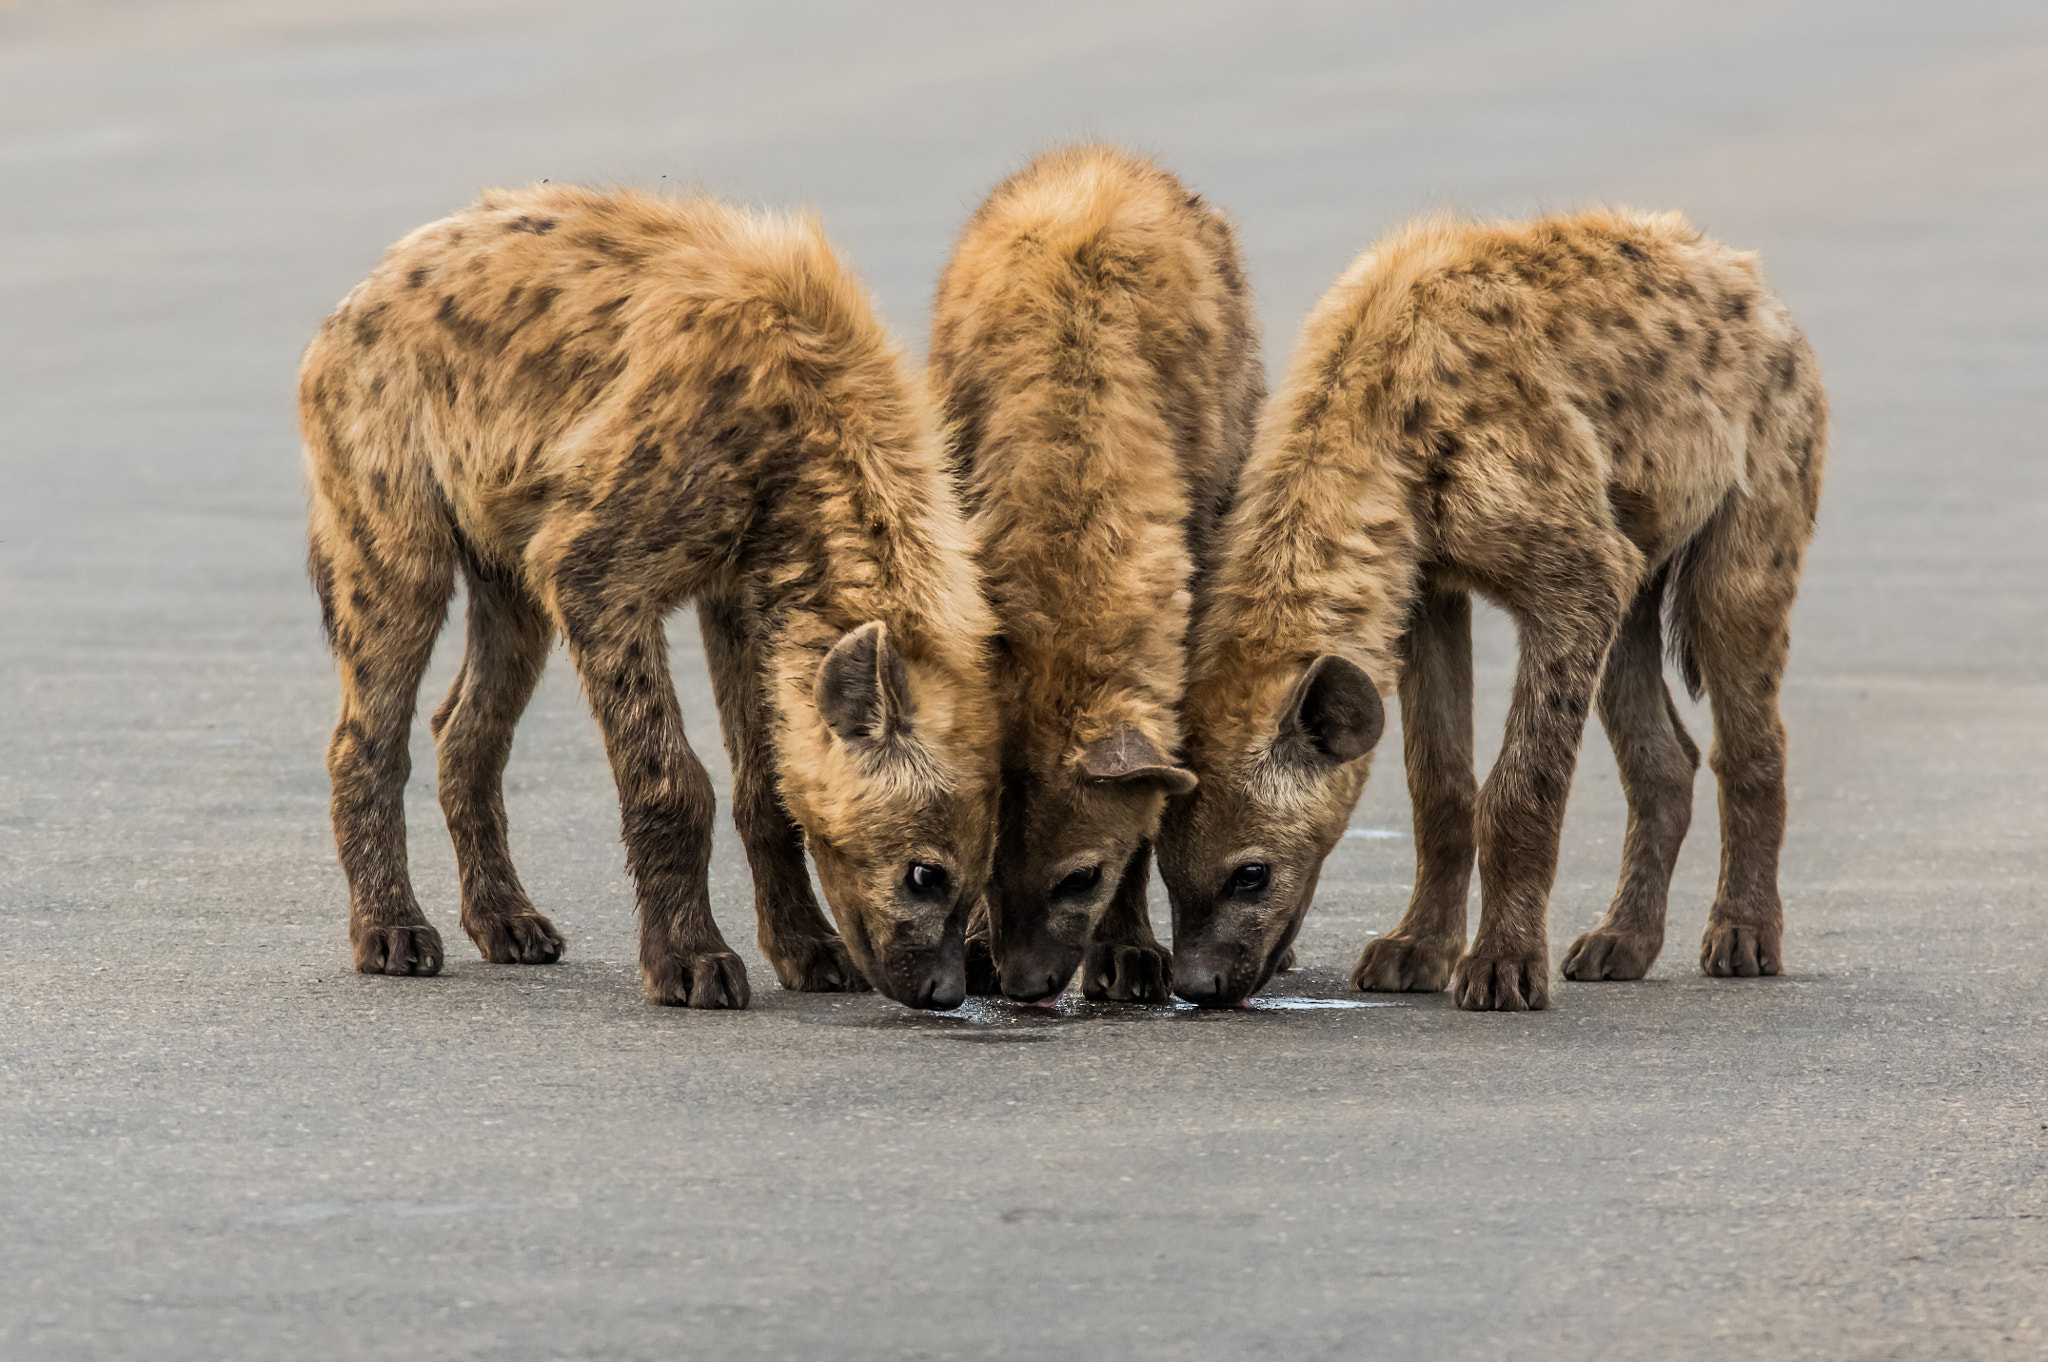 Pentax K-3 sample photo. Hyena pups drinking from a puddle photography